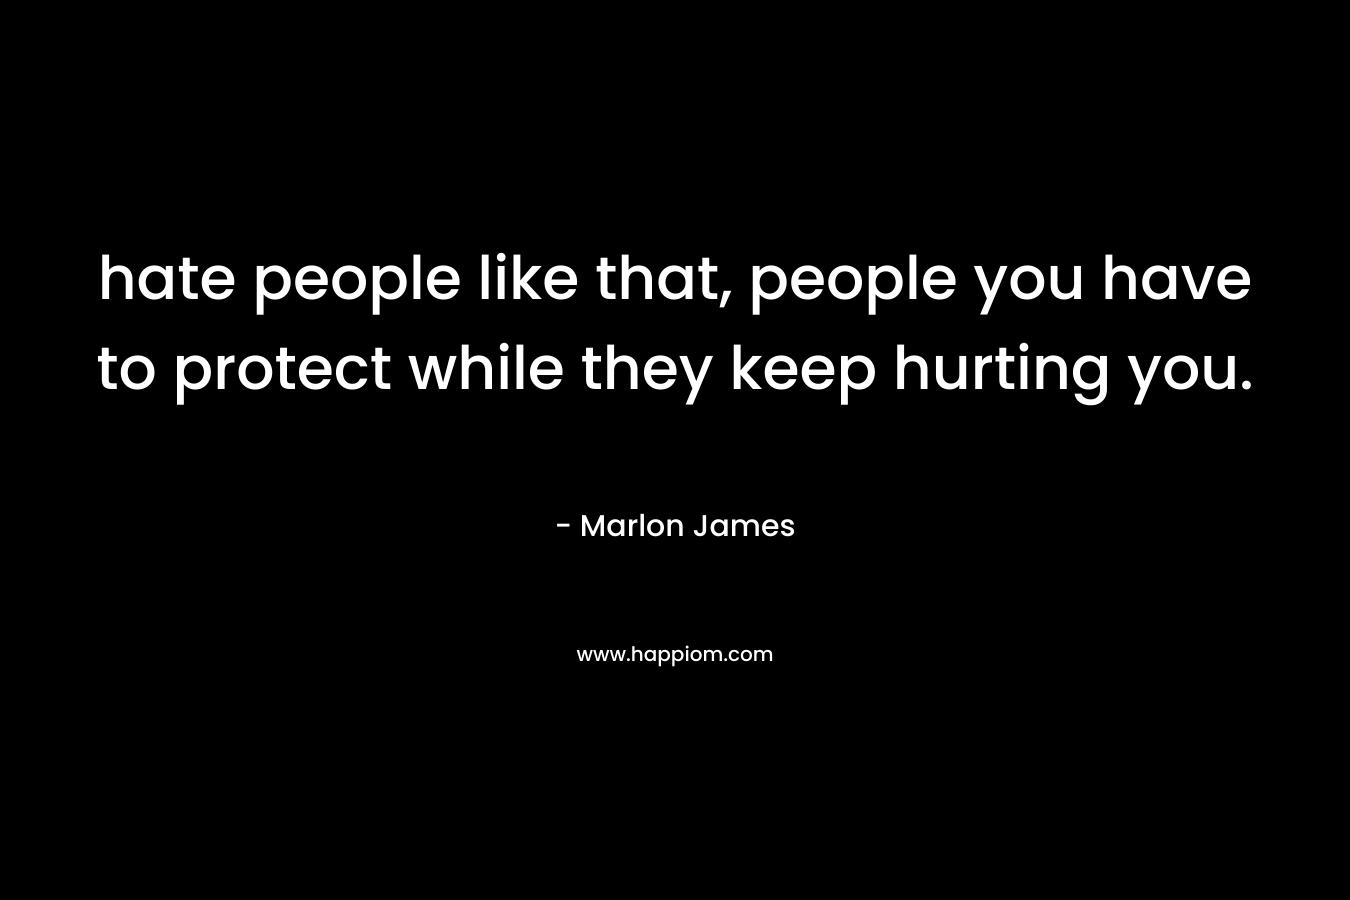 hate people like that, people you have to protect while they keep hurting you.